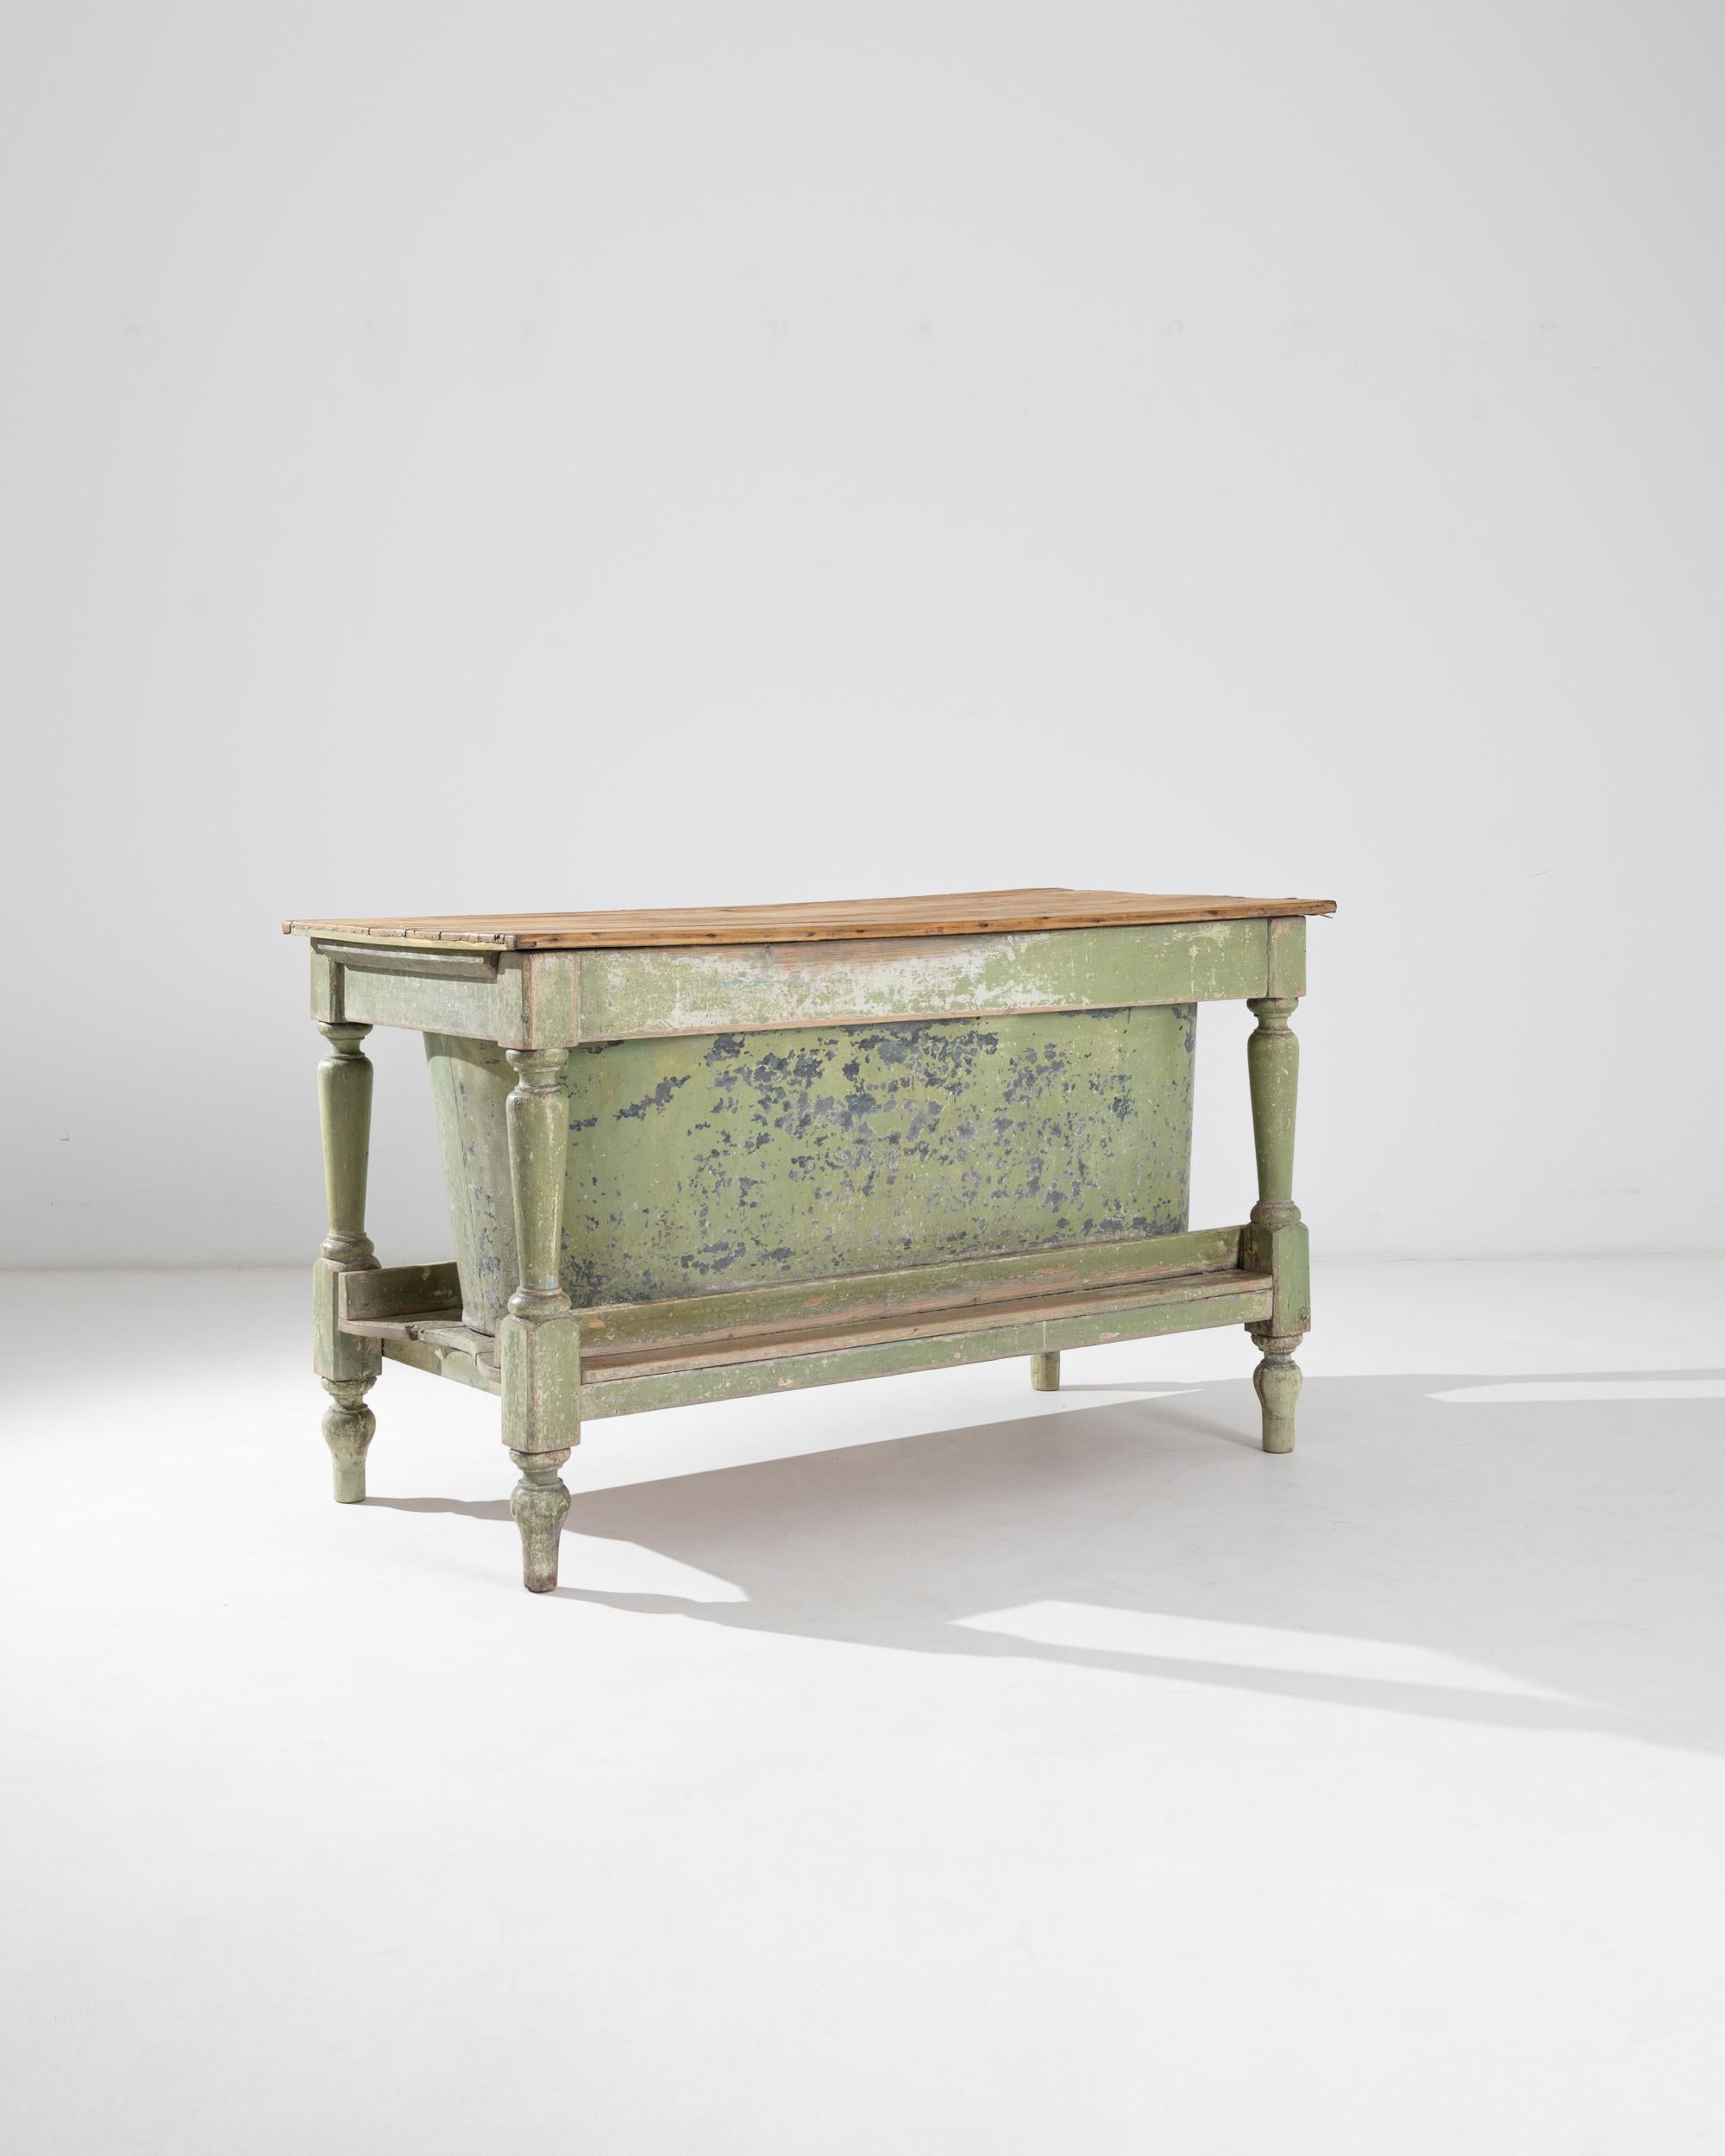 Charming and efficient, this wooden table houses a zinc bathtub beneath a detachable tabletop. Made in France in the 1800s, this piece is a relic of a bygone age when baths were generally only taken once a week, and would have been filled by heating